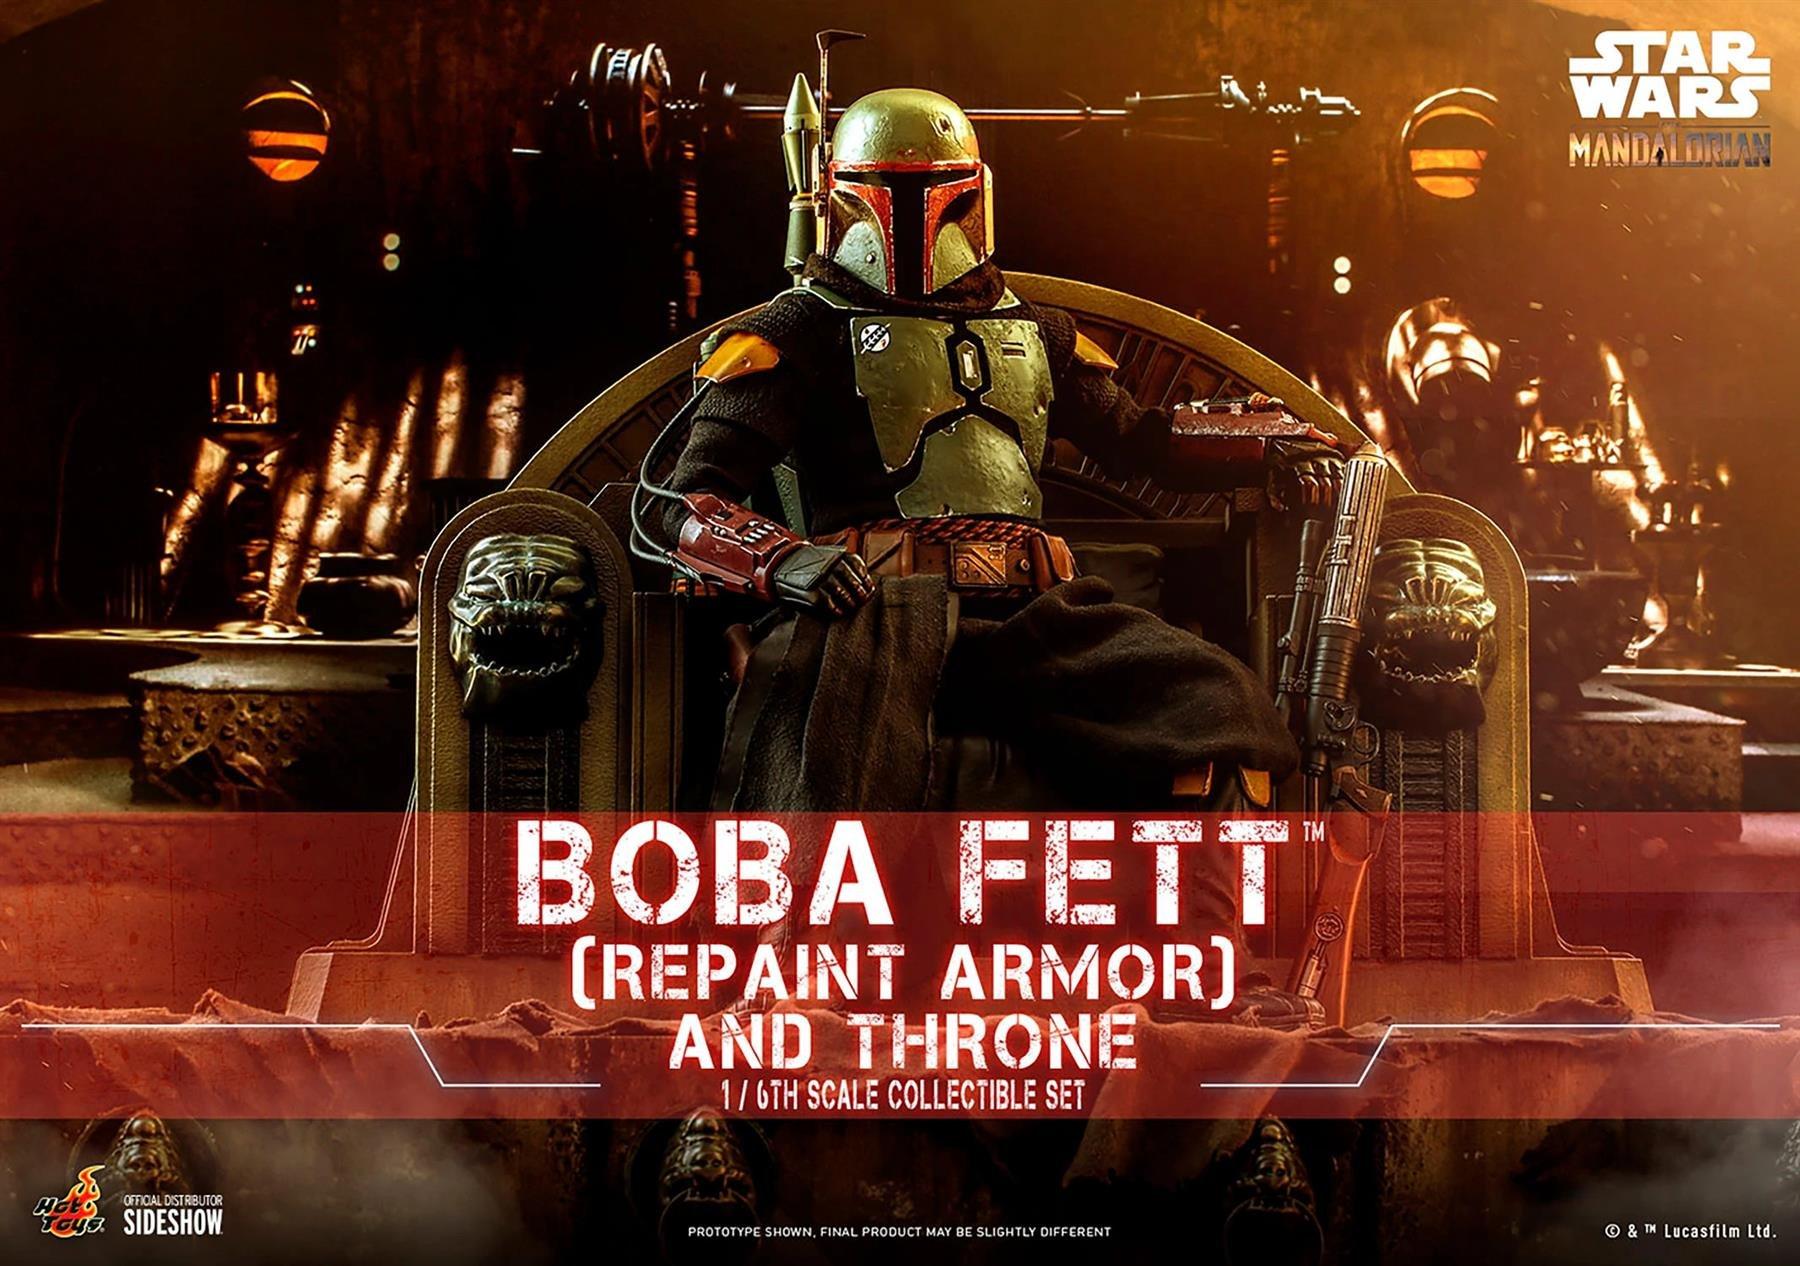 Photos - Action Figures / Transformers Star Boba Fett Repaint Armour and Throne Collectible Set 1:6 Scale Hot Toys 908 